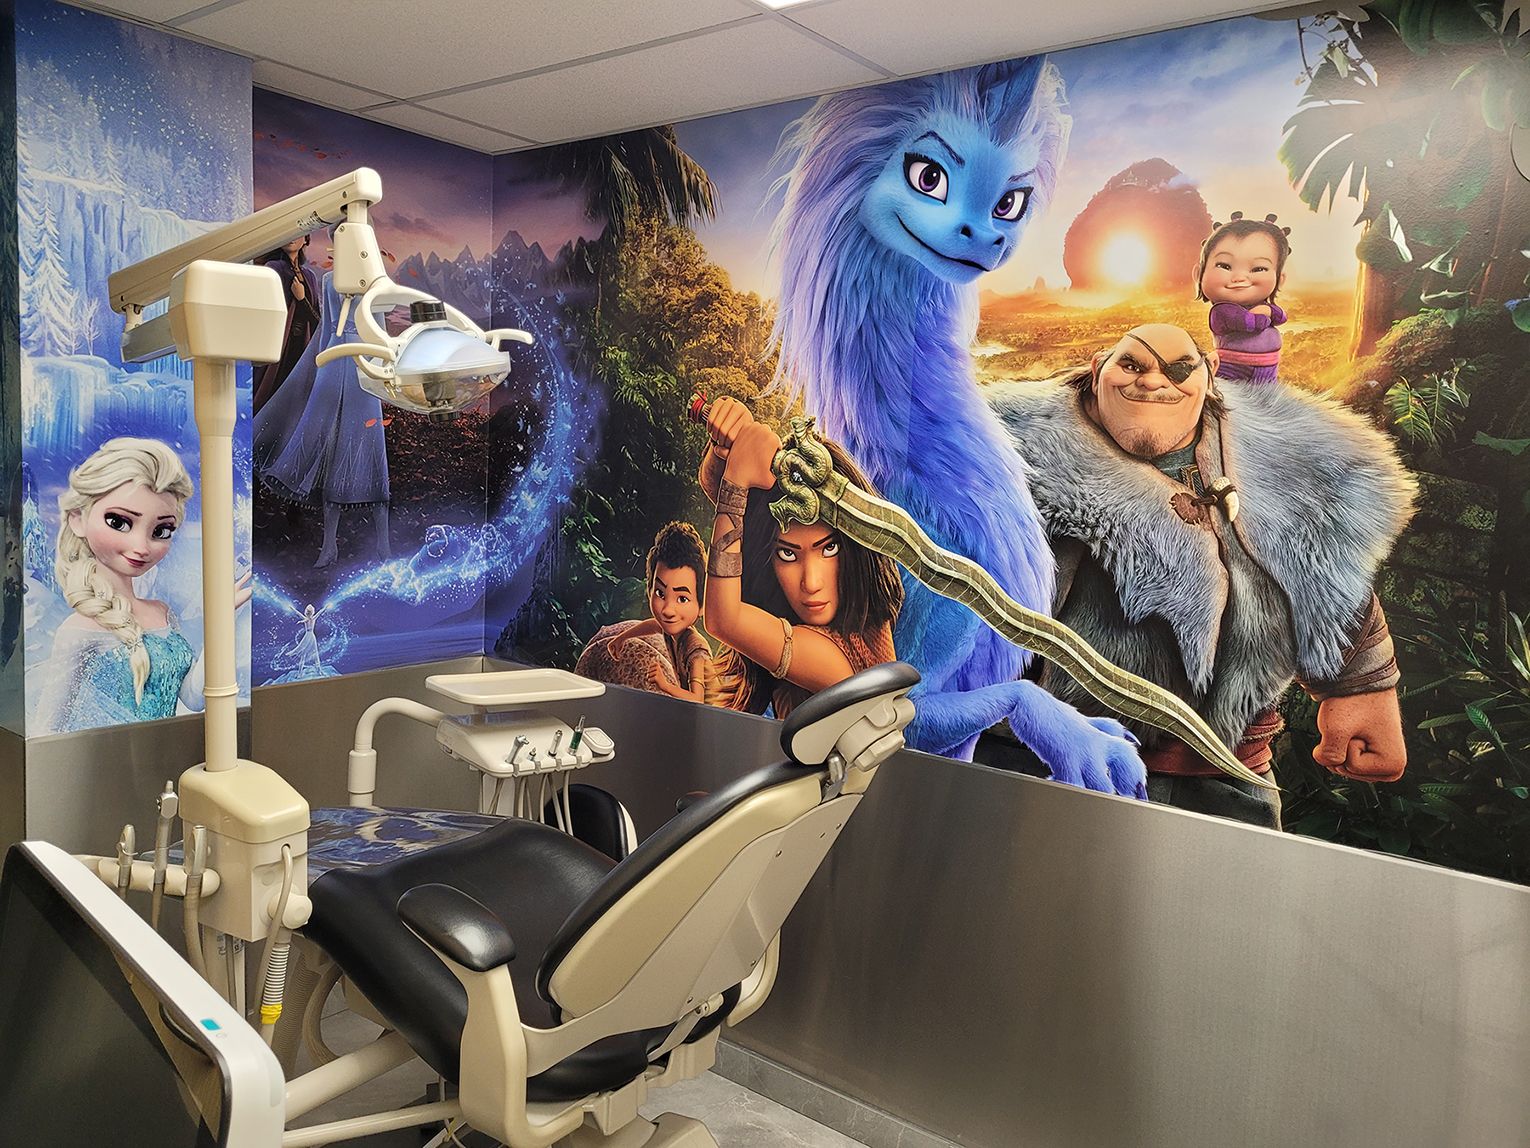 A dental treatment room at Northwest Dental Centre featuring a mural fo Disney characters.